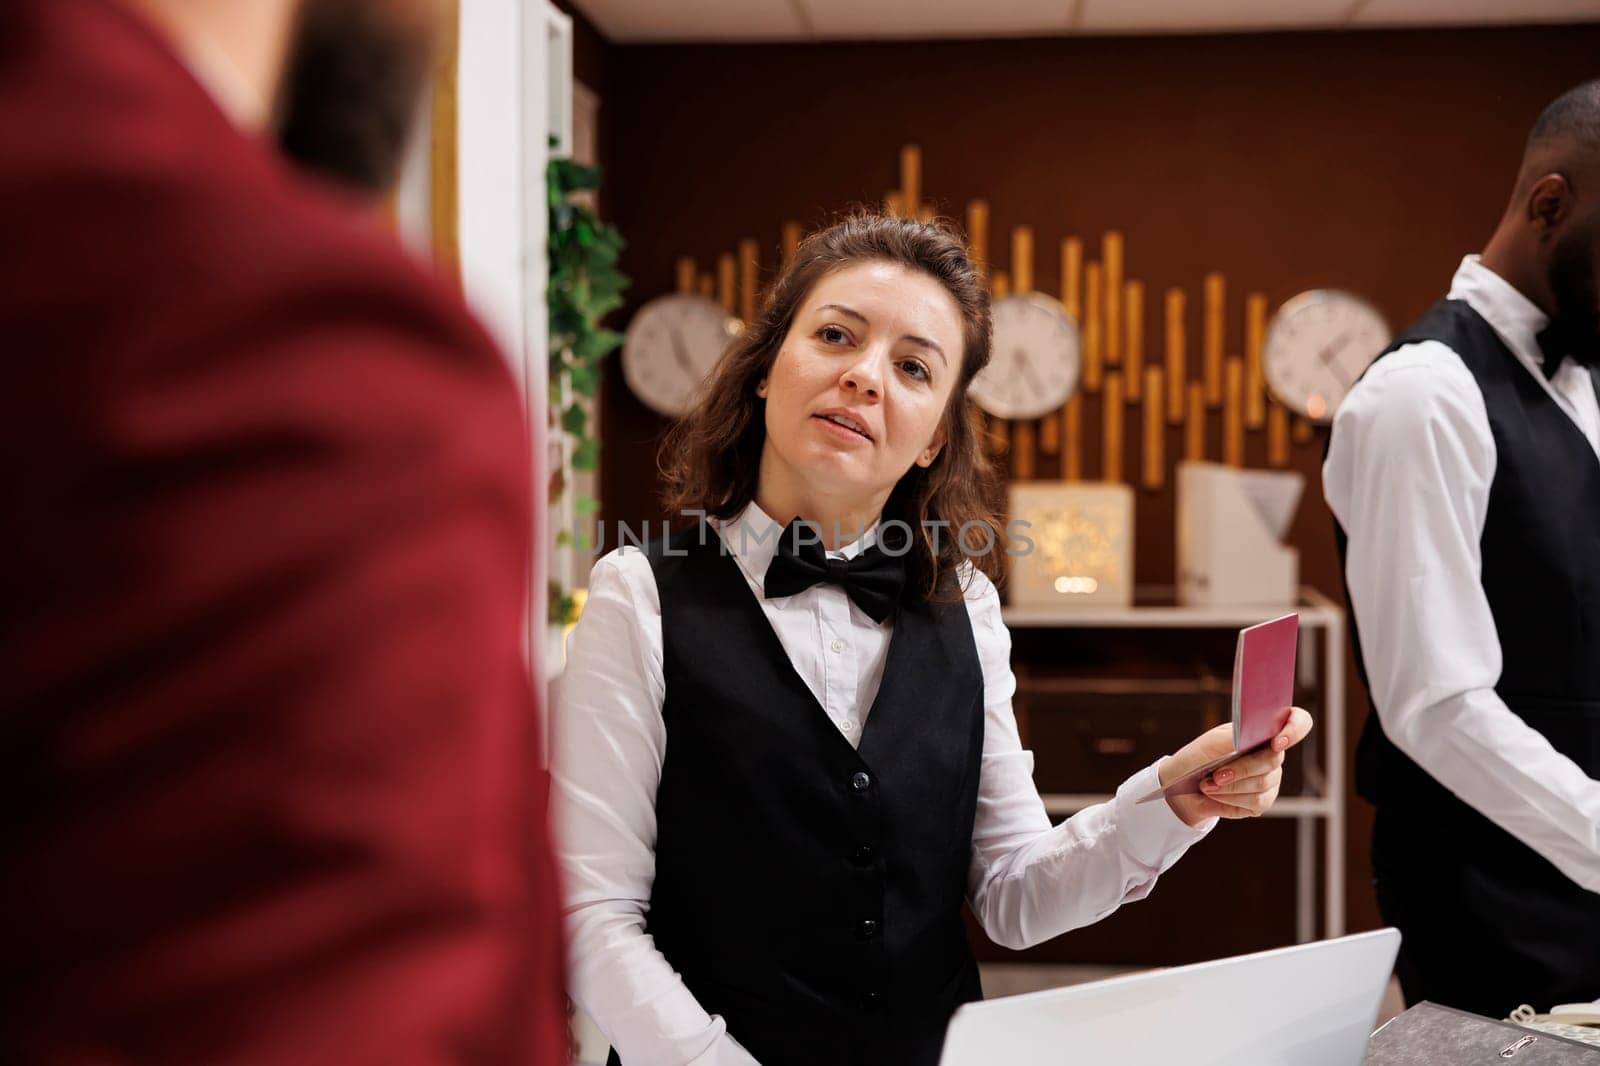 Hotel staff verifying passport for guest identification, preparing to do check in procedure in lobby. Receptionist looking at id papers after welcoming white collar worker on business trip.